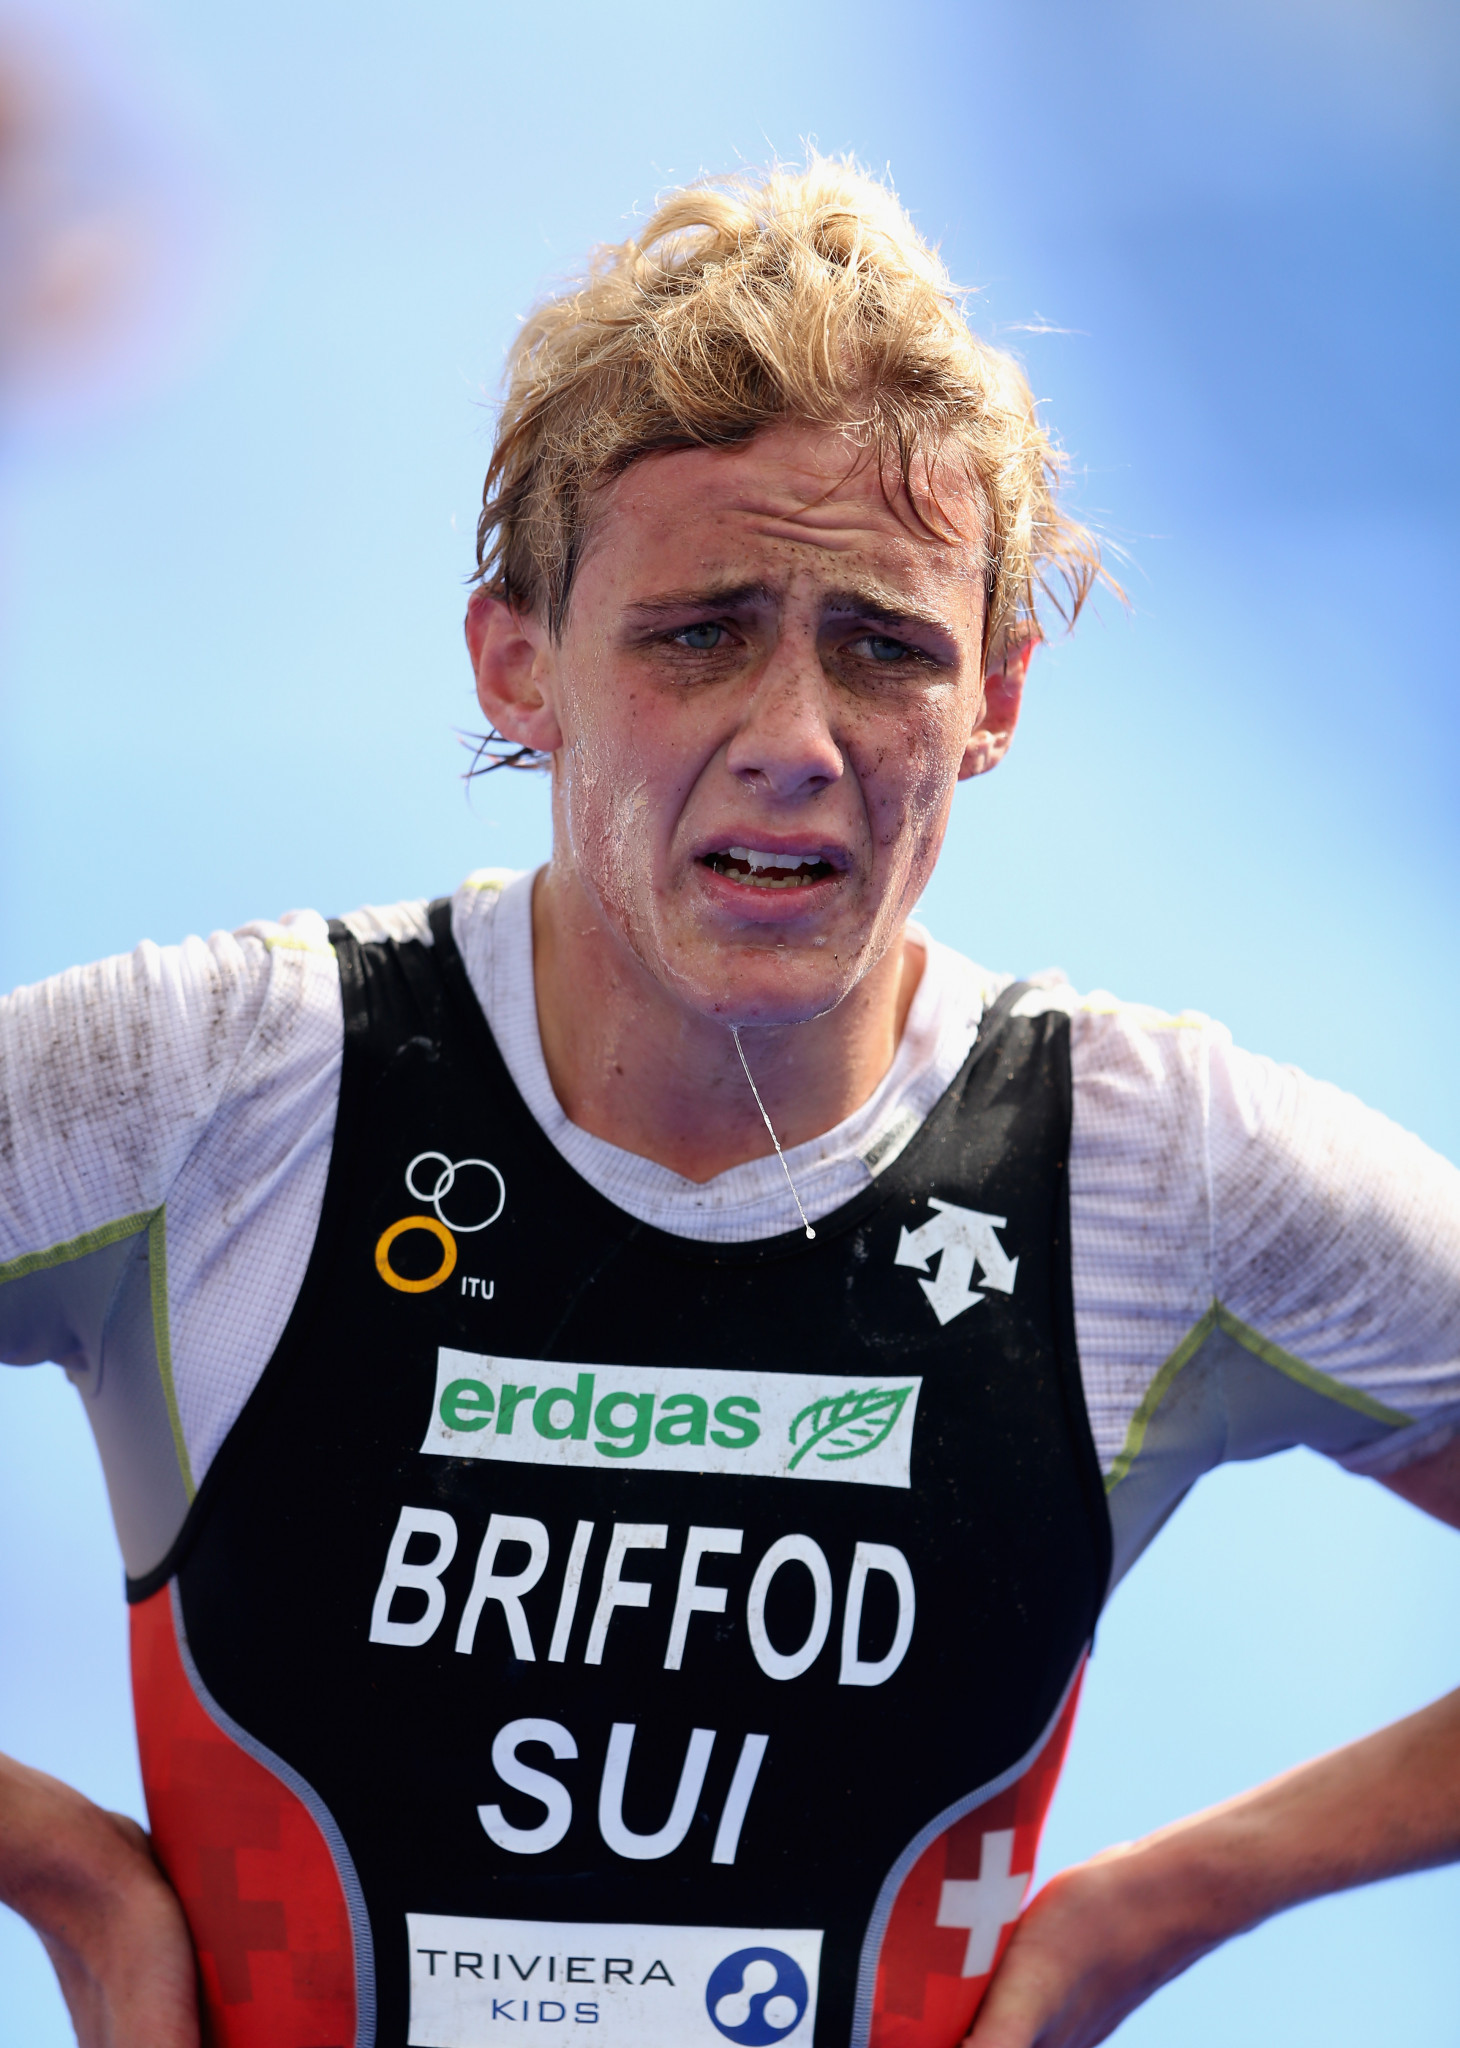 Adrien Briffod will be the top-ranked male athlete at the World Triathlon Cup Karlovy Vary ©Getty Images